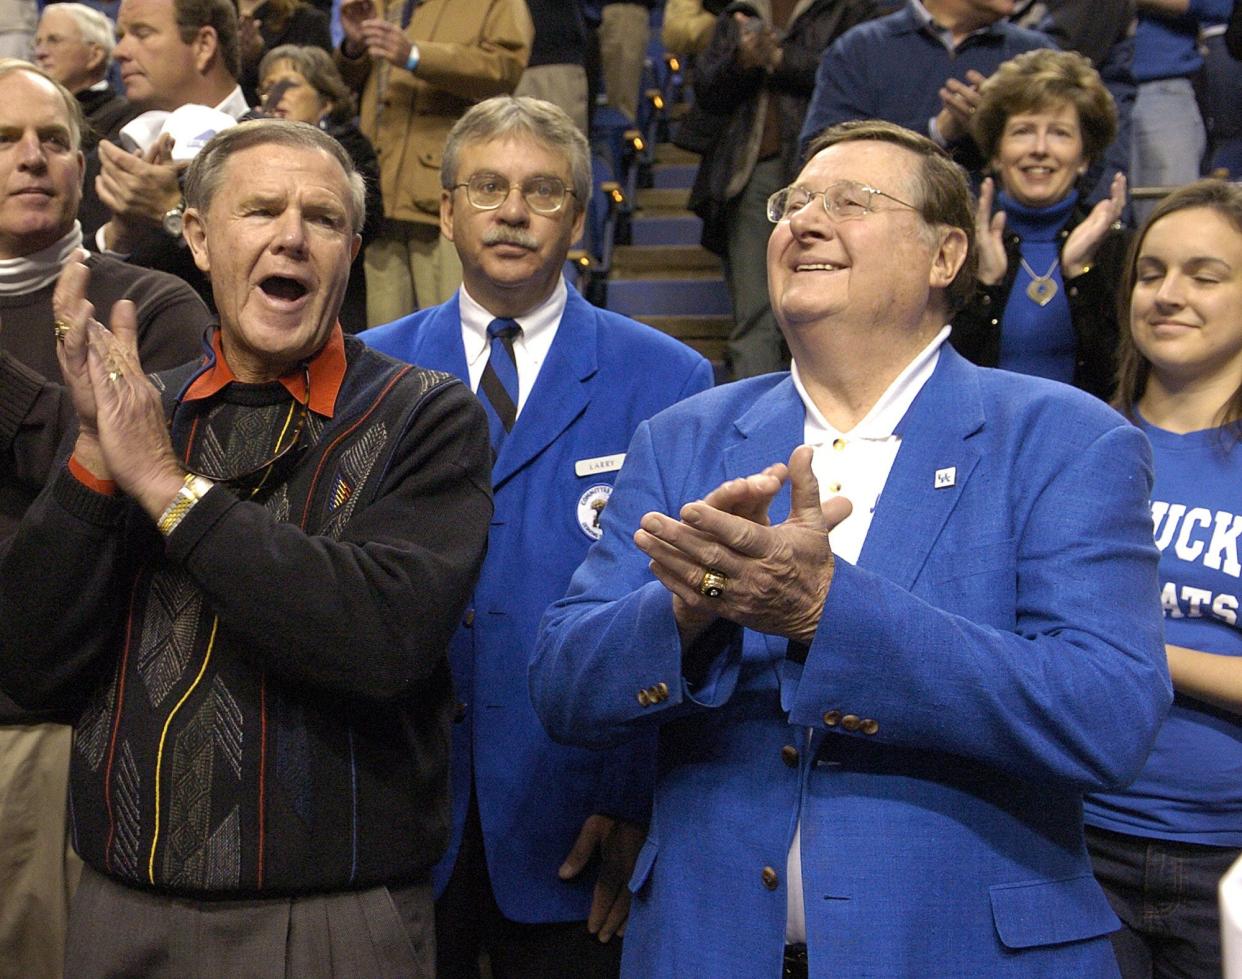 UK vs. UL in college basketball at Rupp Arena. Former coaching rivals Denny Crum and Joe B. Hall whoop it up.12/17/05 